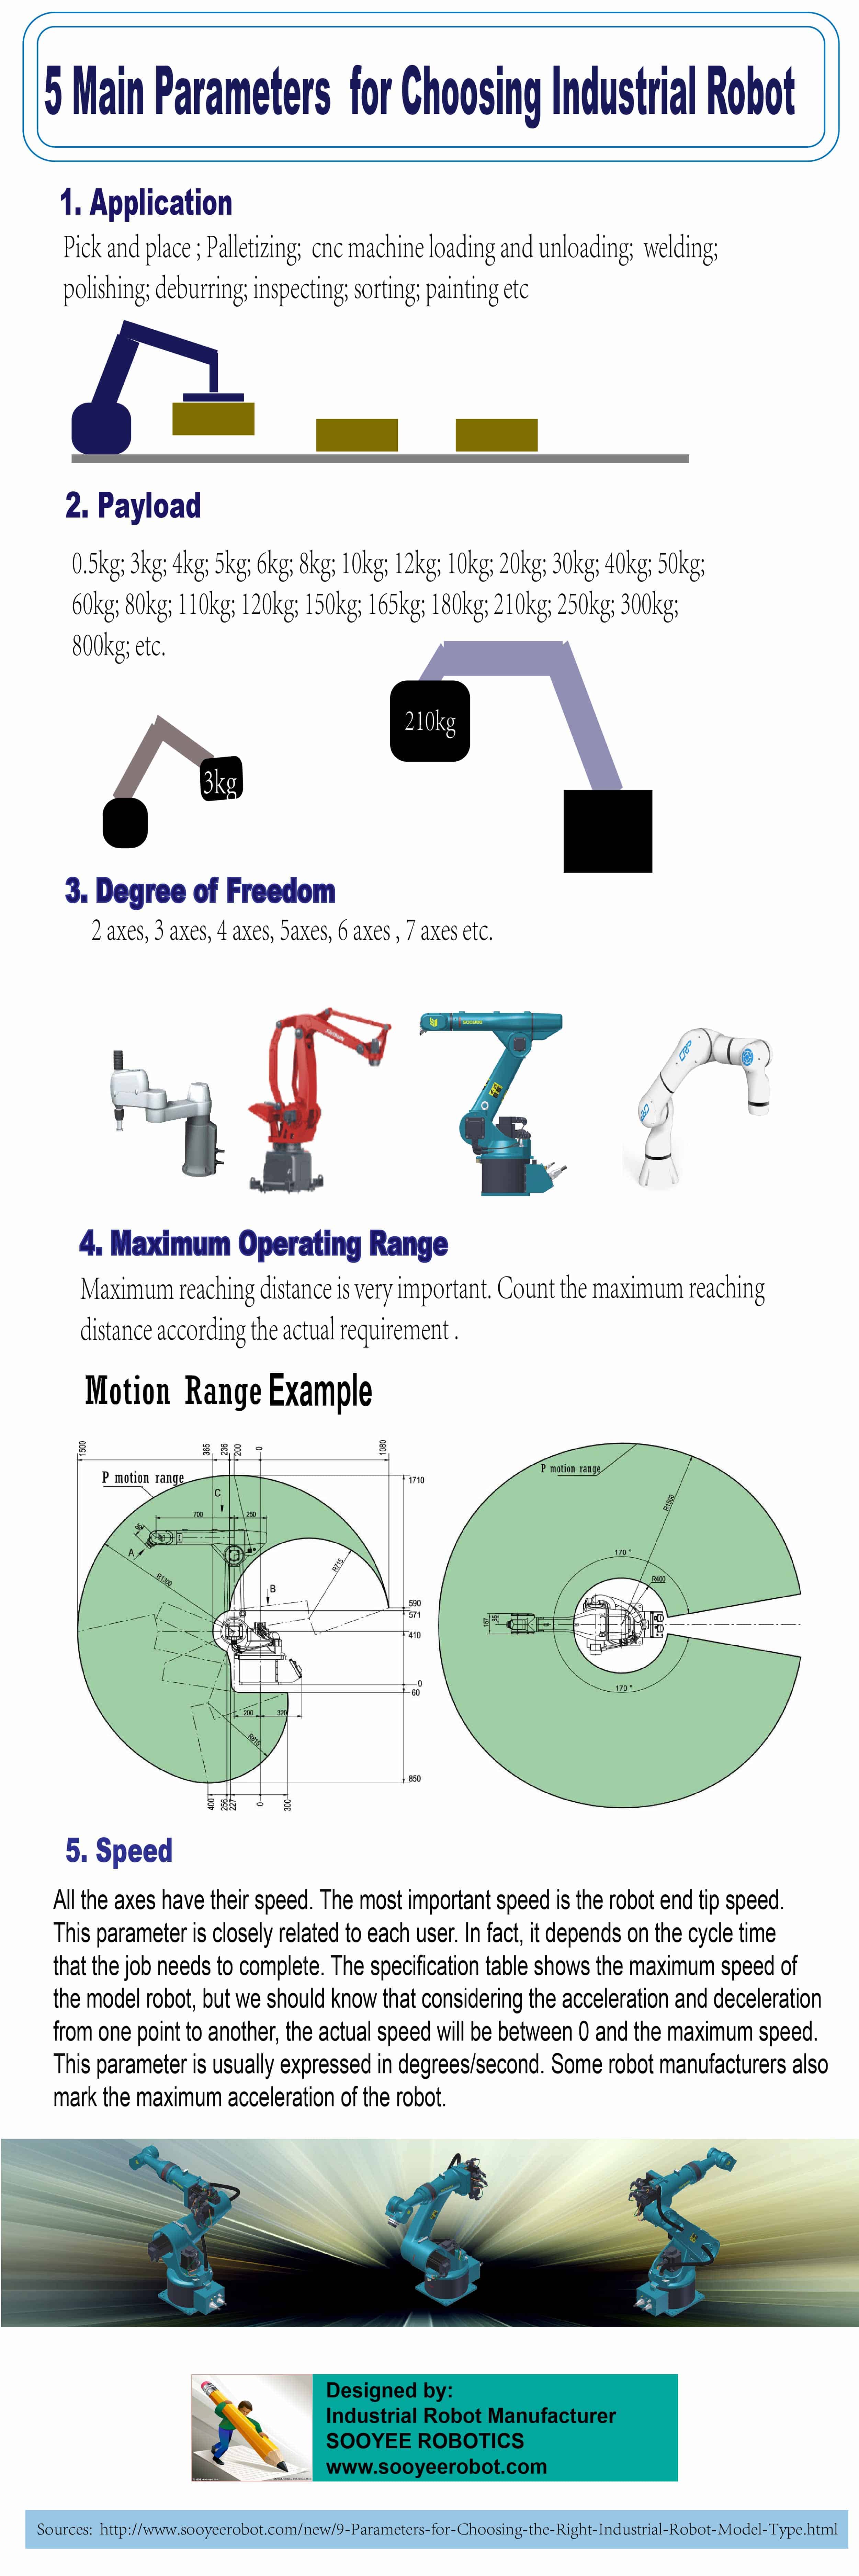 Parameters for Choosing Industrial Robot Infographic